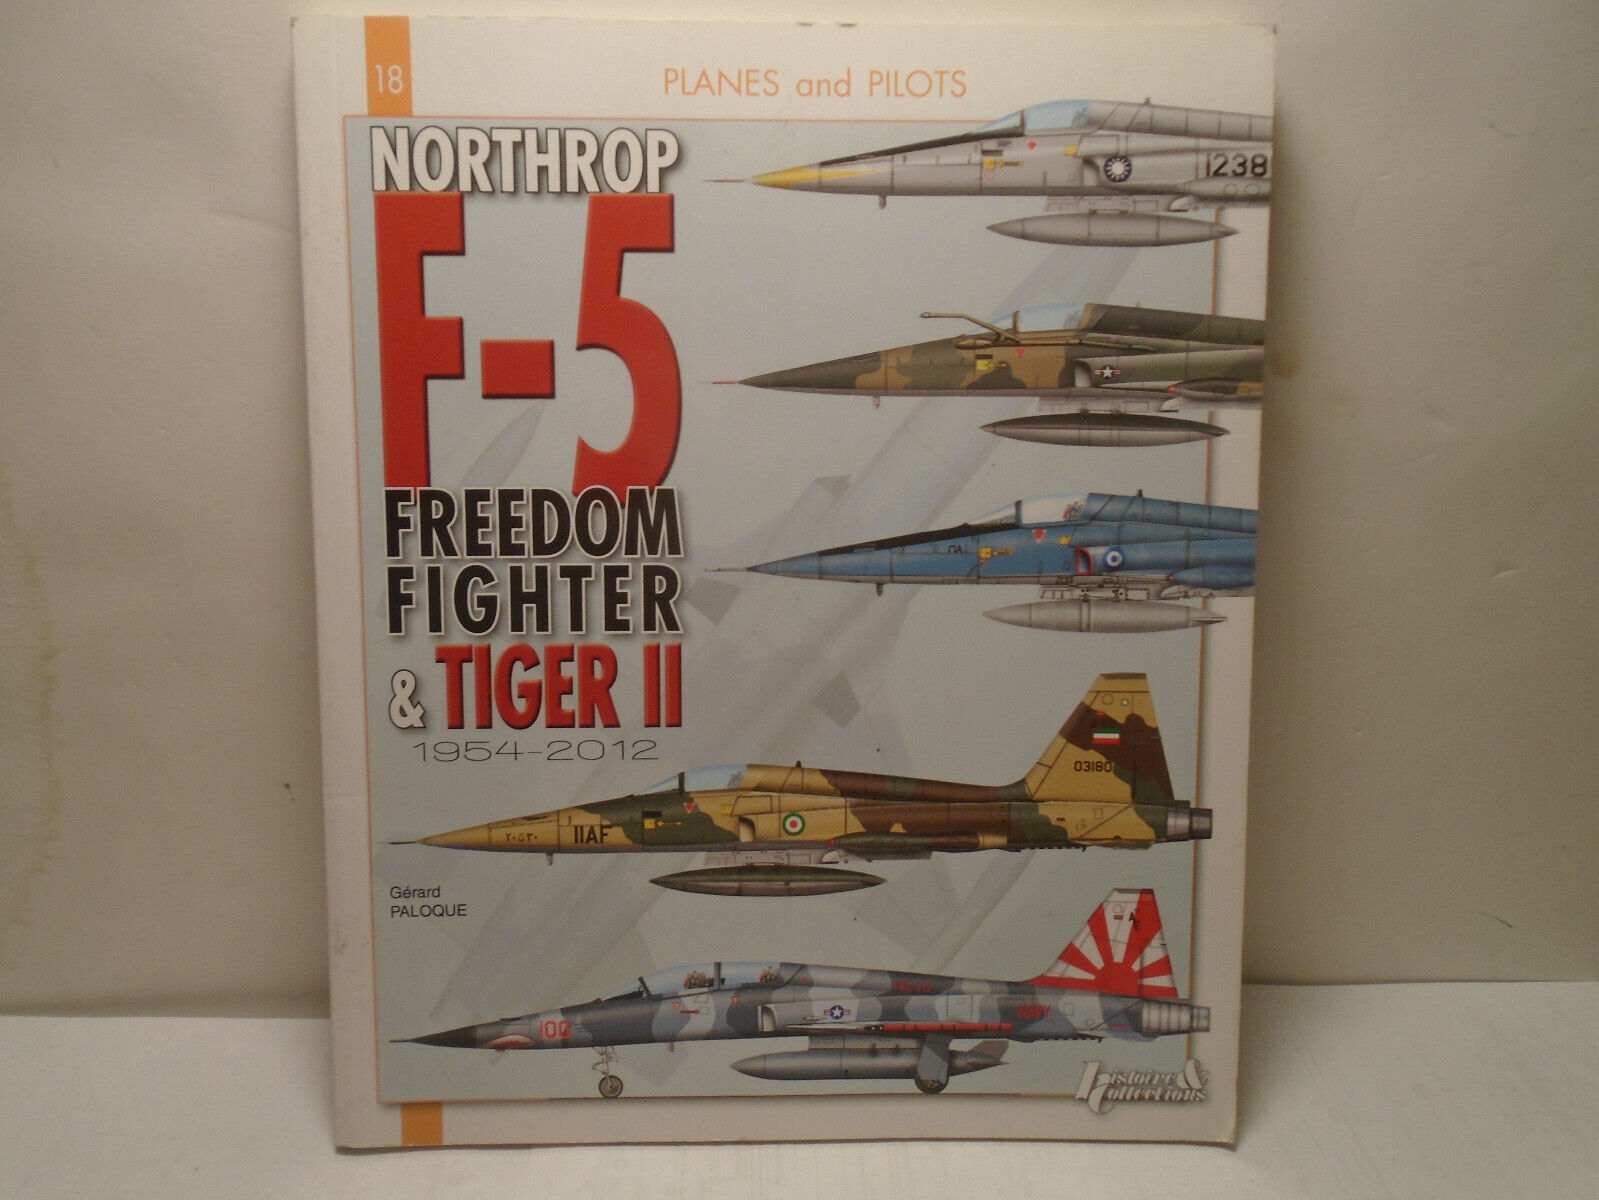 PLANES & PILOTS #18 NORTHROP F-5 FREEDOM FIGHTER & TIGER II HISTOIRE & COLECTION